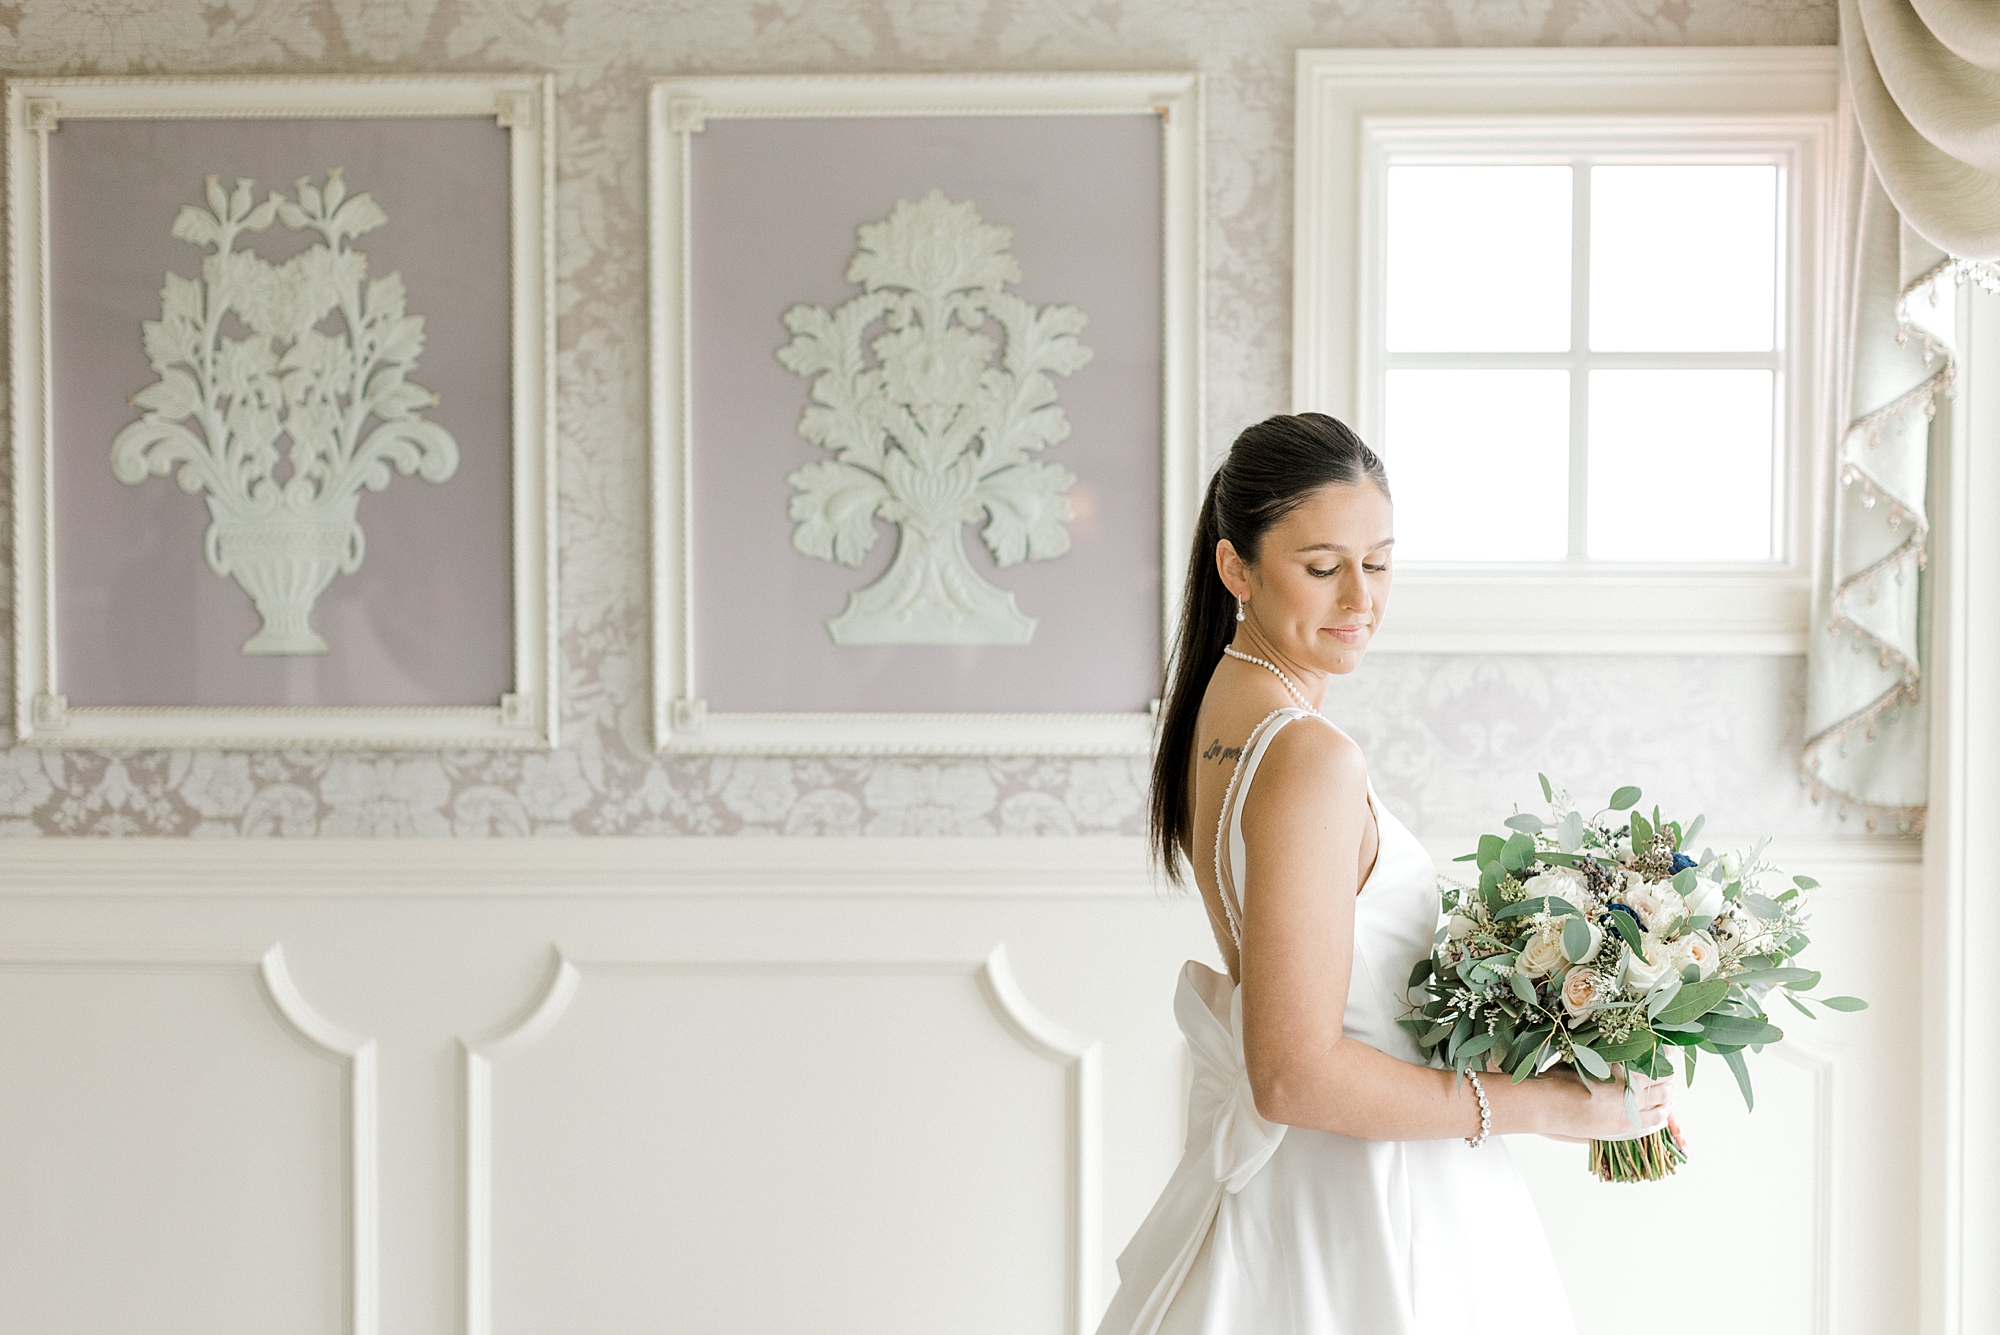 bride in wedding dress with bow on the back looks over shoulder holding bouquet of white and green flowers